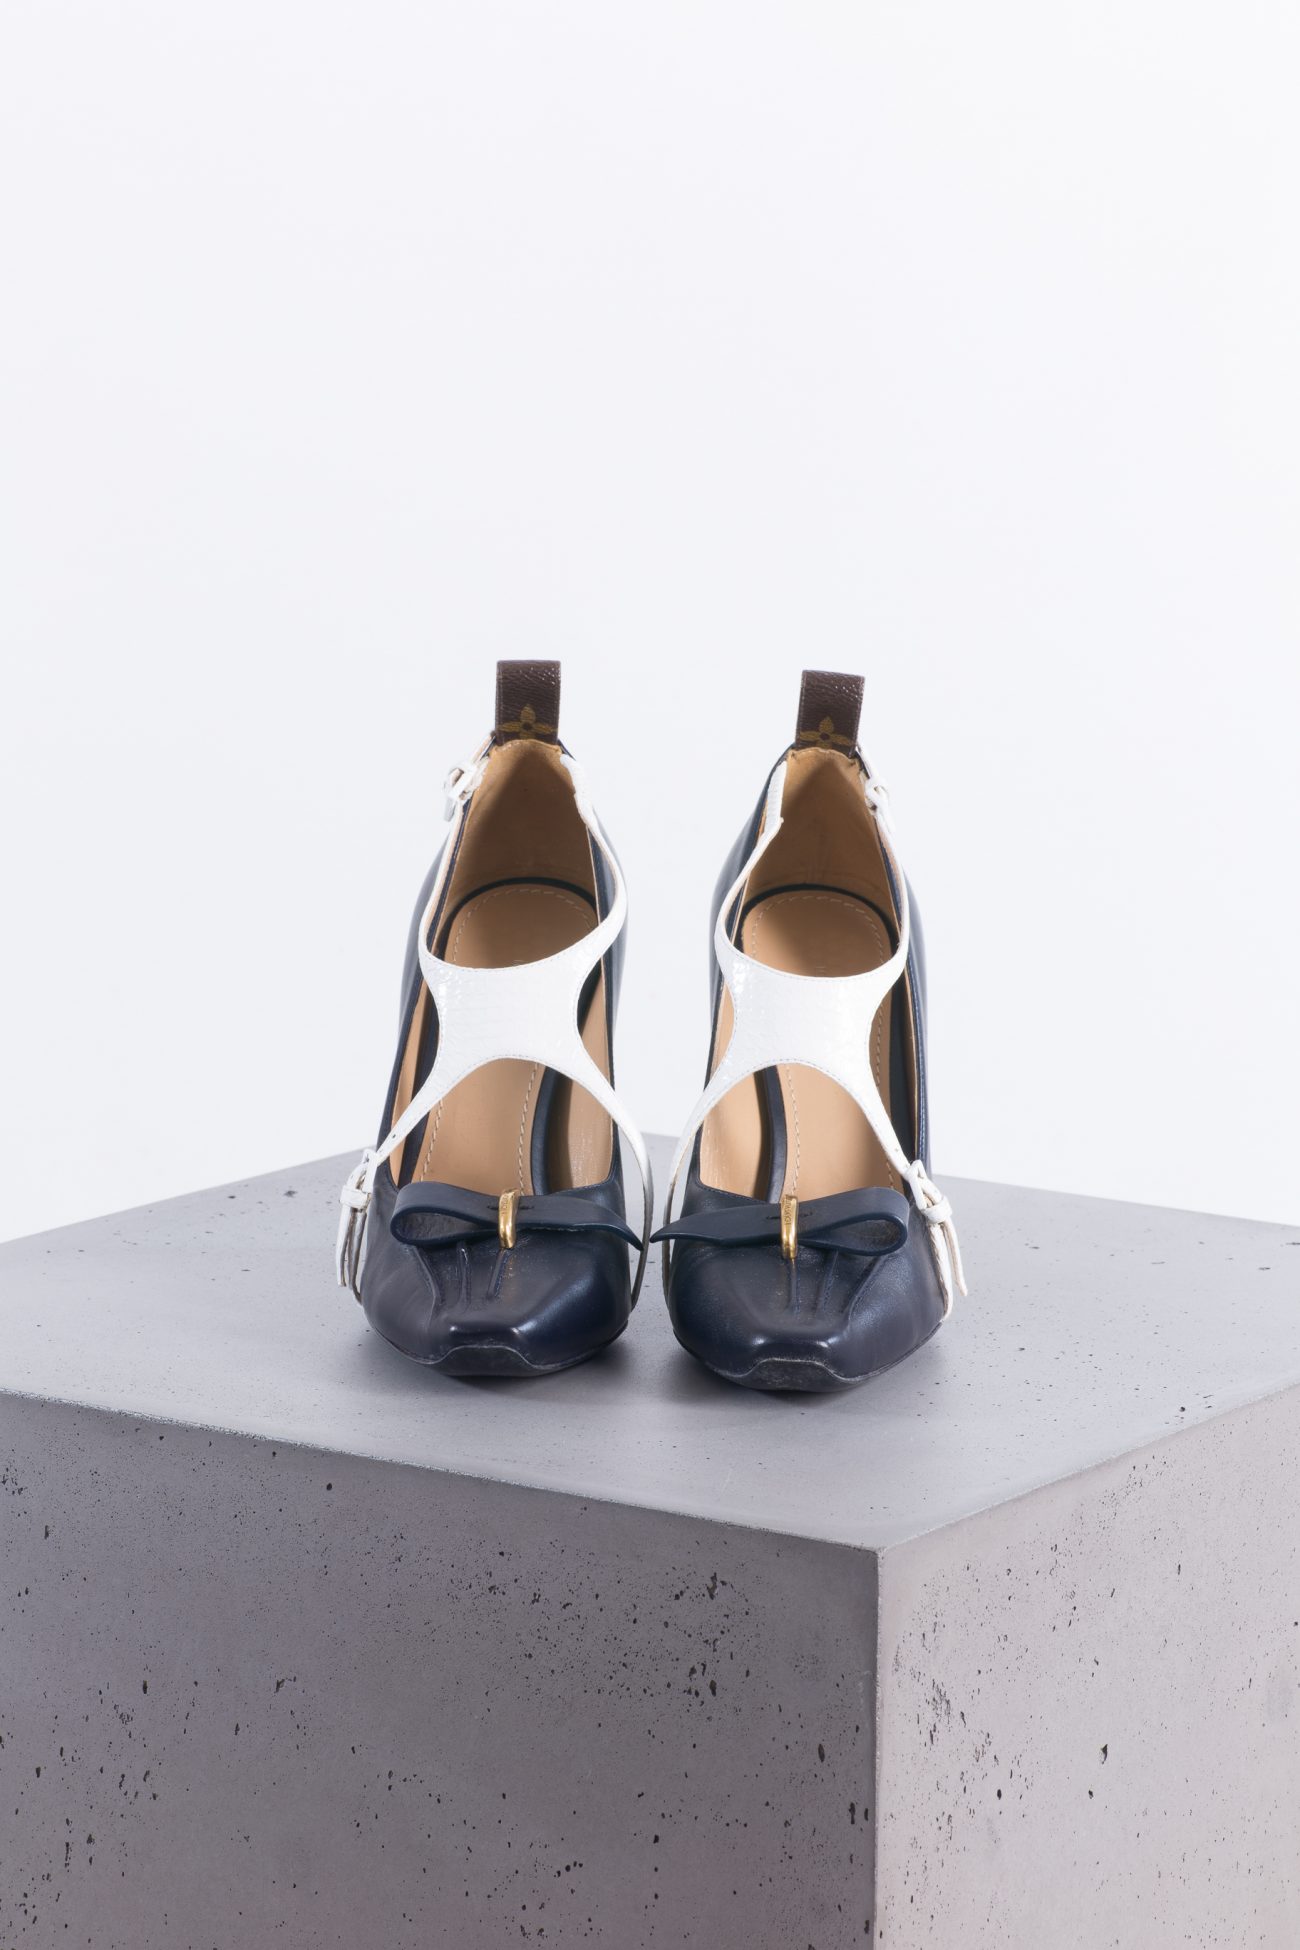 Louis Vuitton pumps from FW18 collection